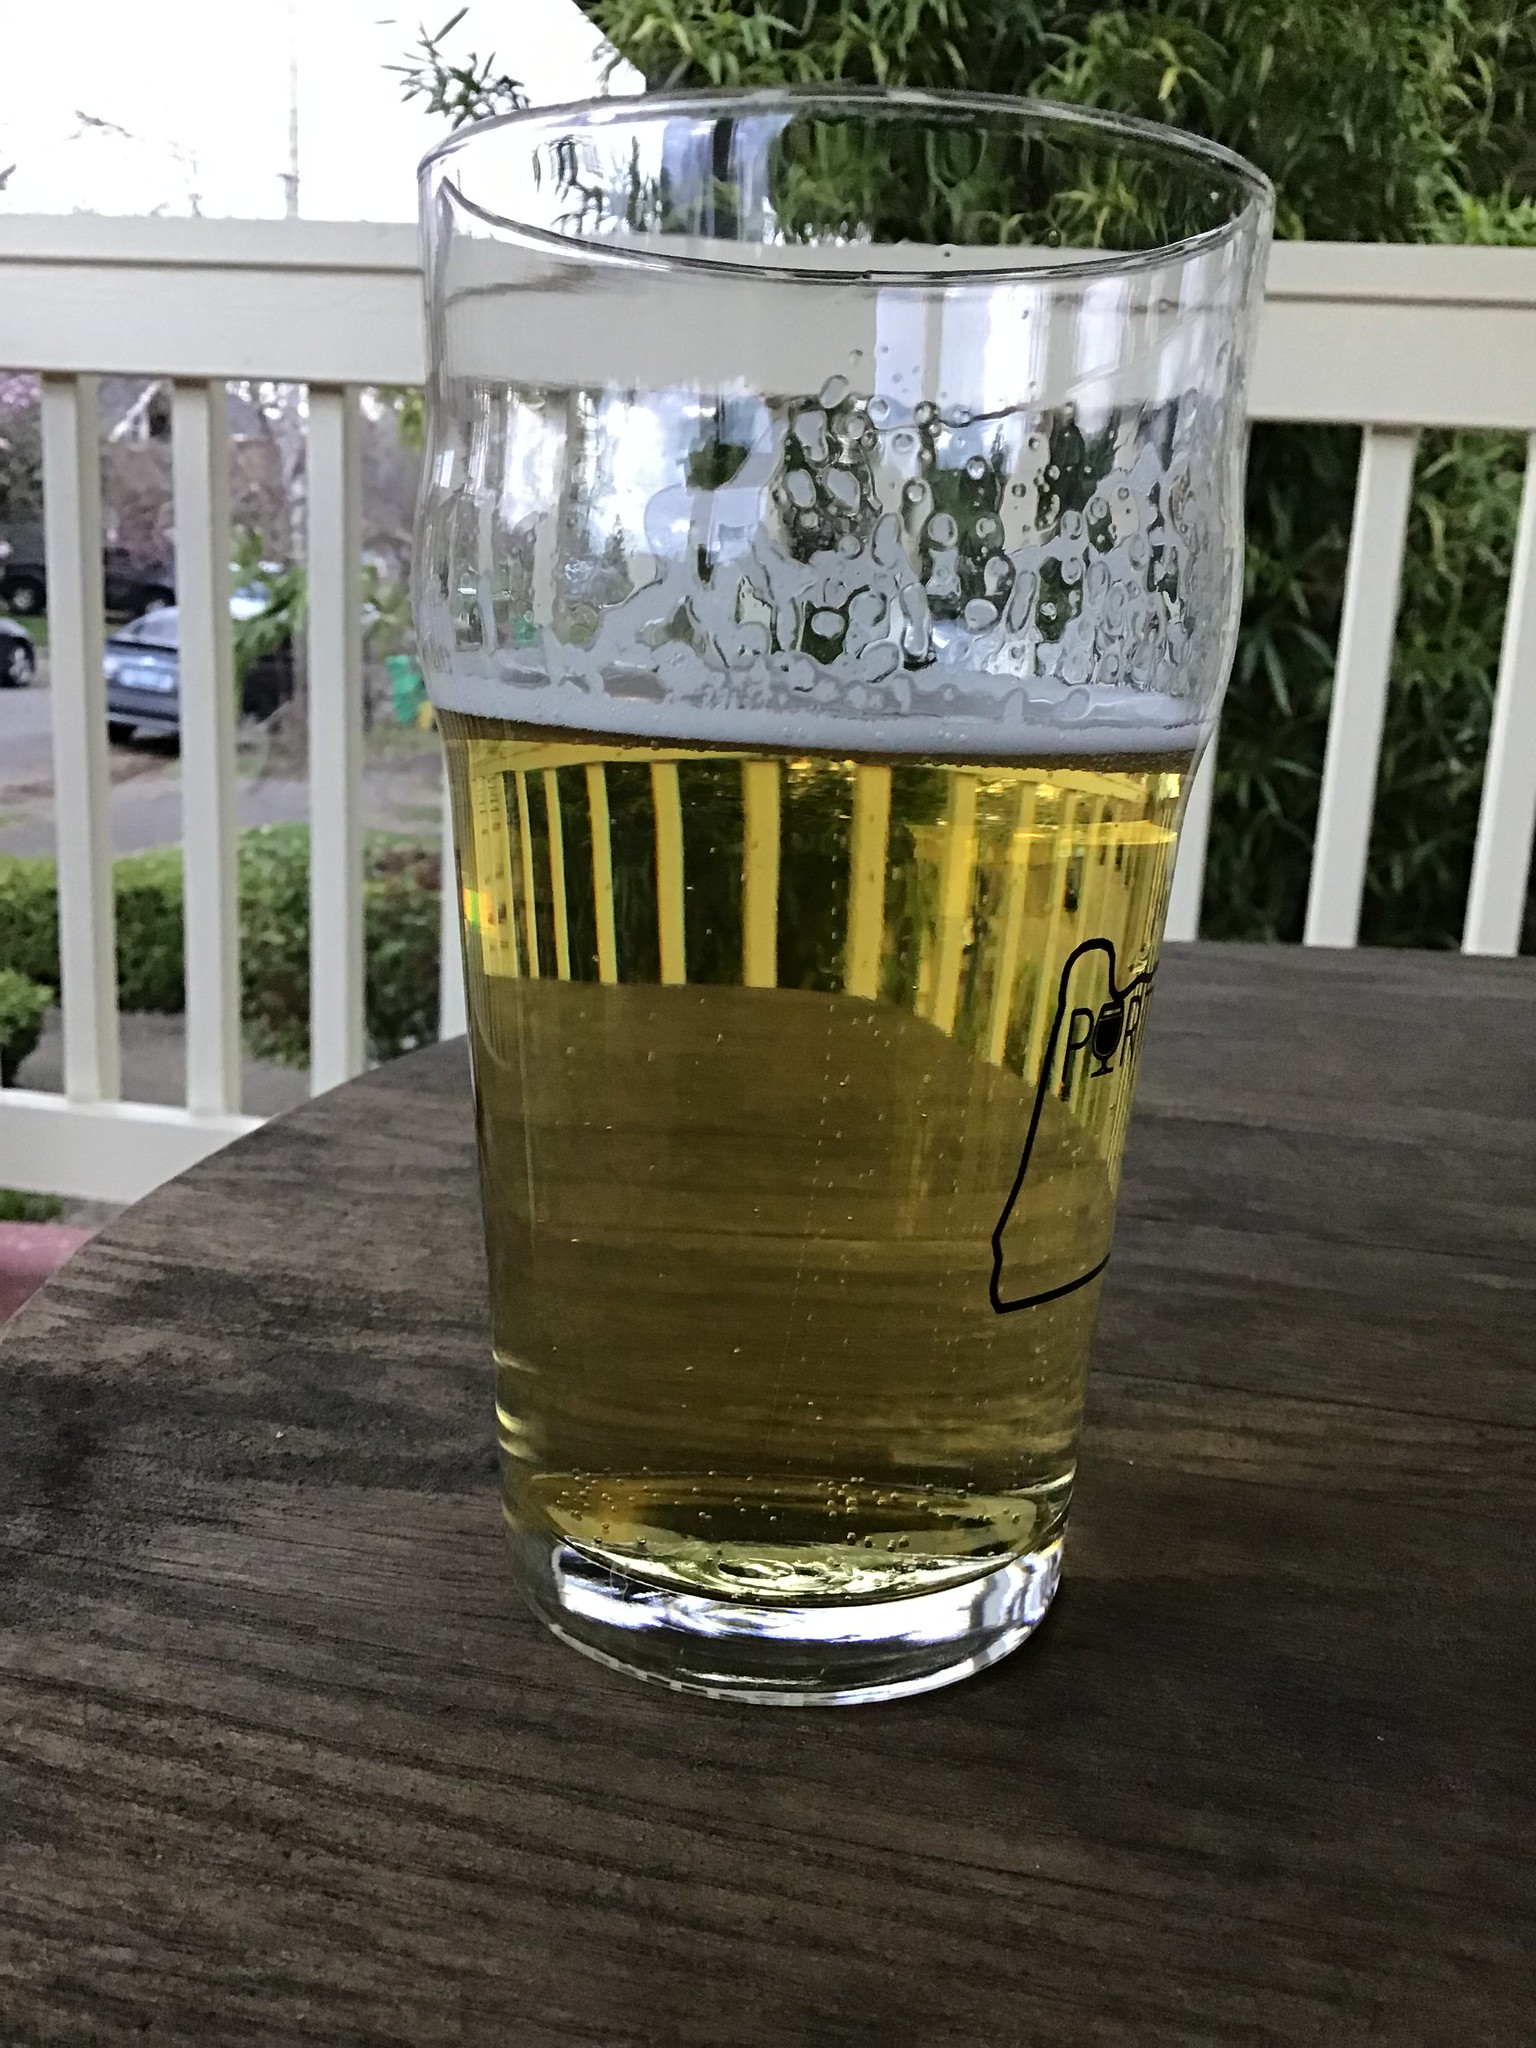 Occidental's Japanese lager in glass on table outside